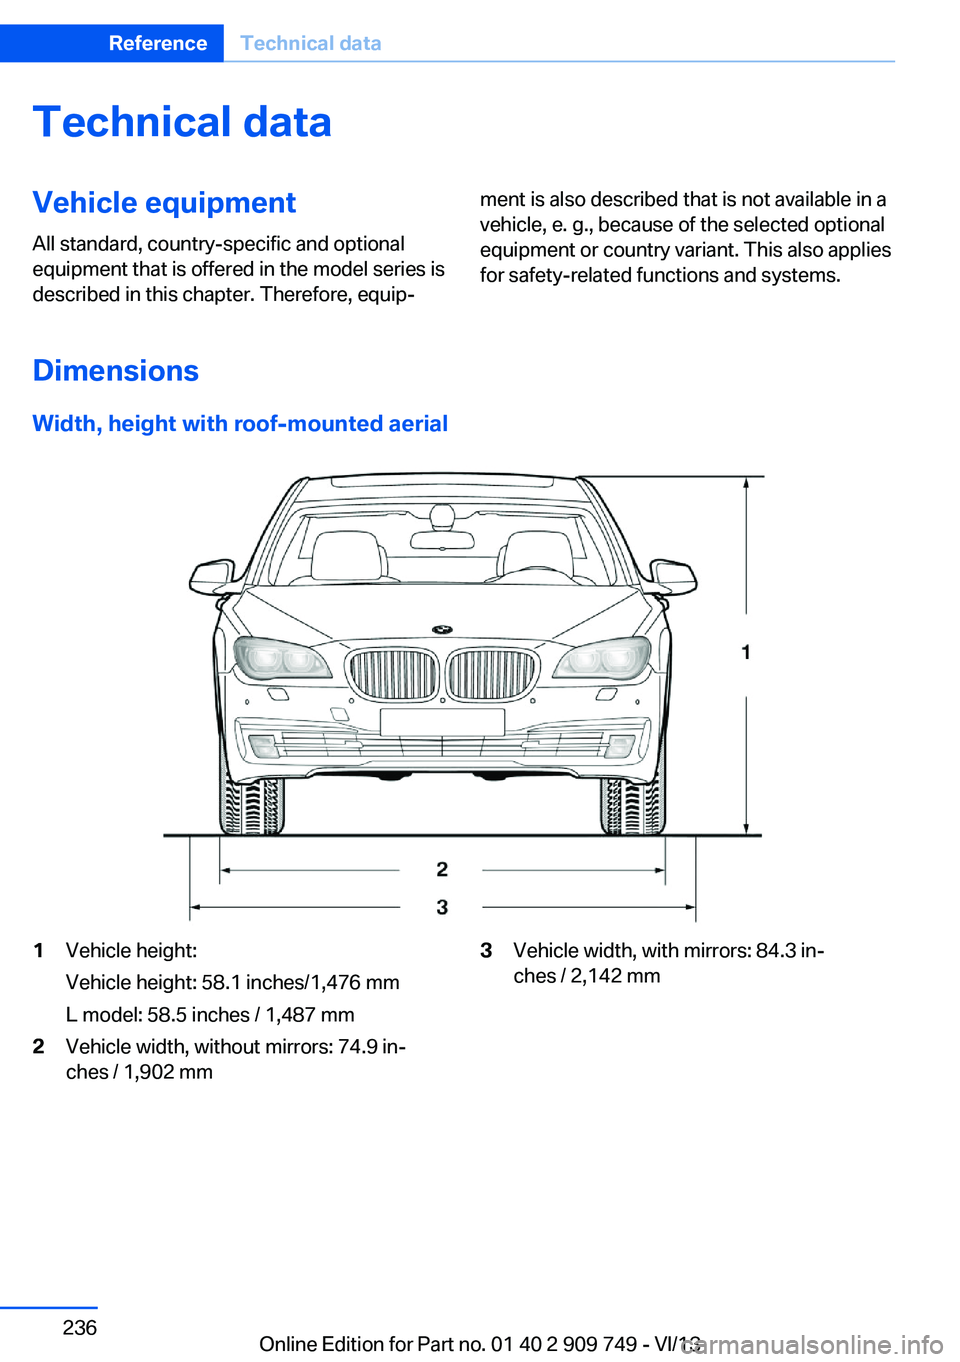 BMW 750I XDRIVE 2014  Owners Manual Technical dataVehicle equipment
All standard, country-specific and optional
equipment that is offered in the model series is
described in this chapter. Therefore, equip‐ment is also described that i